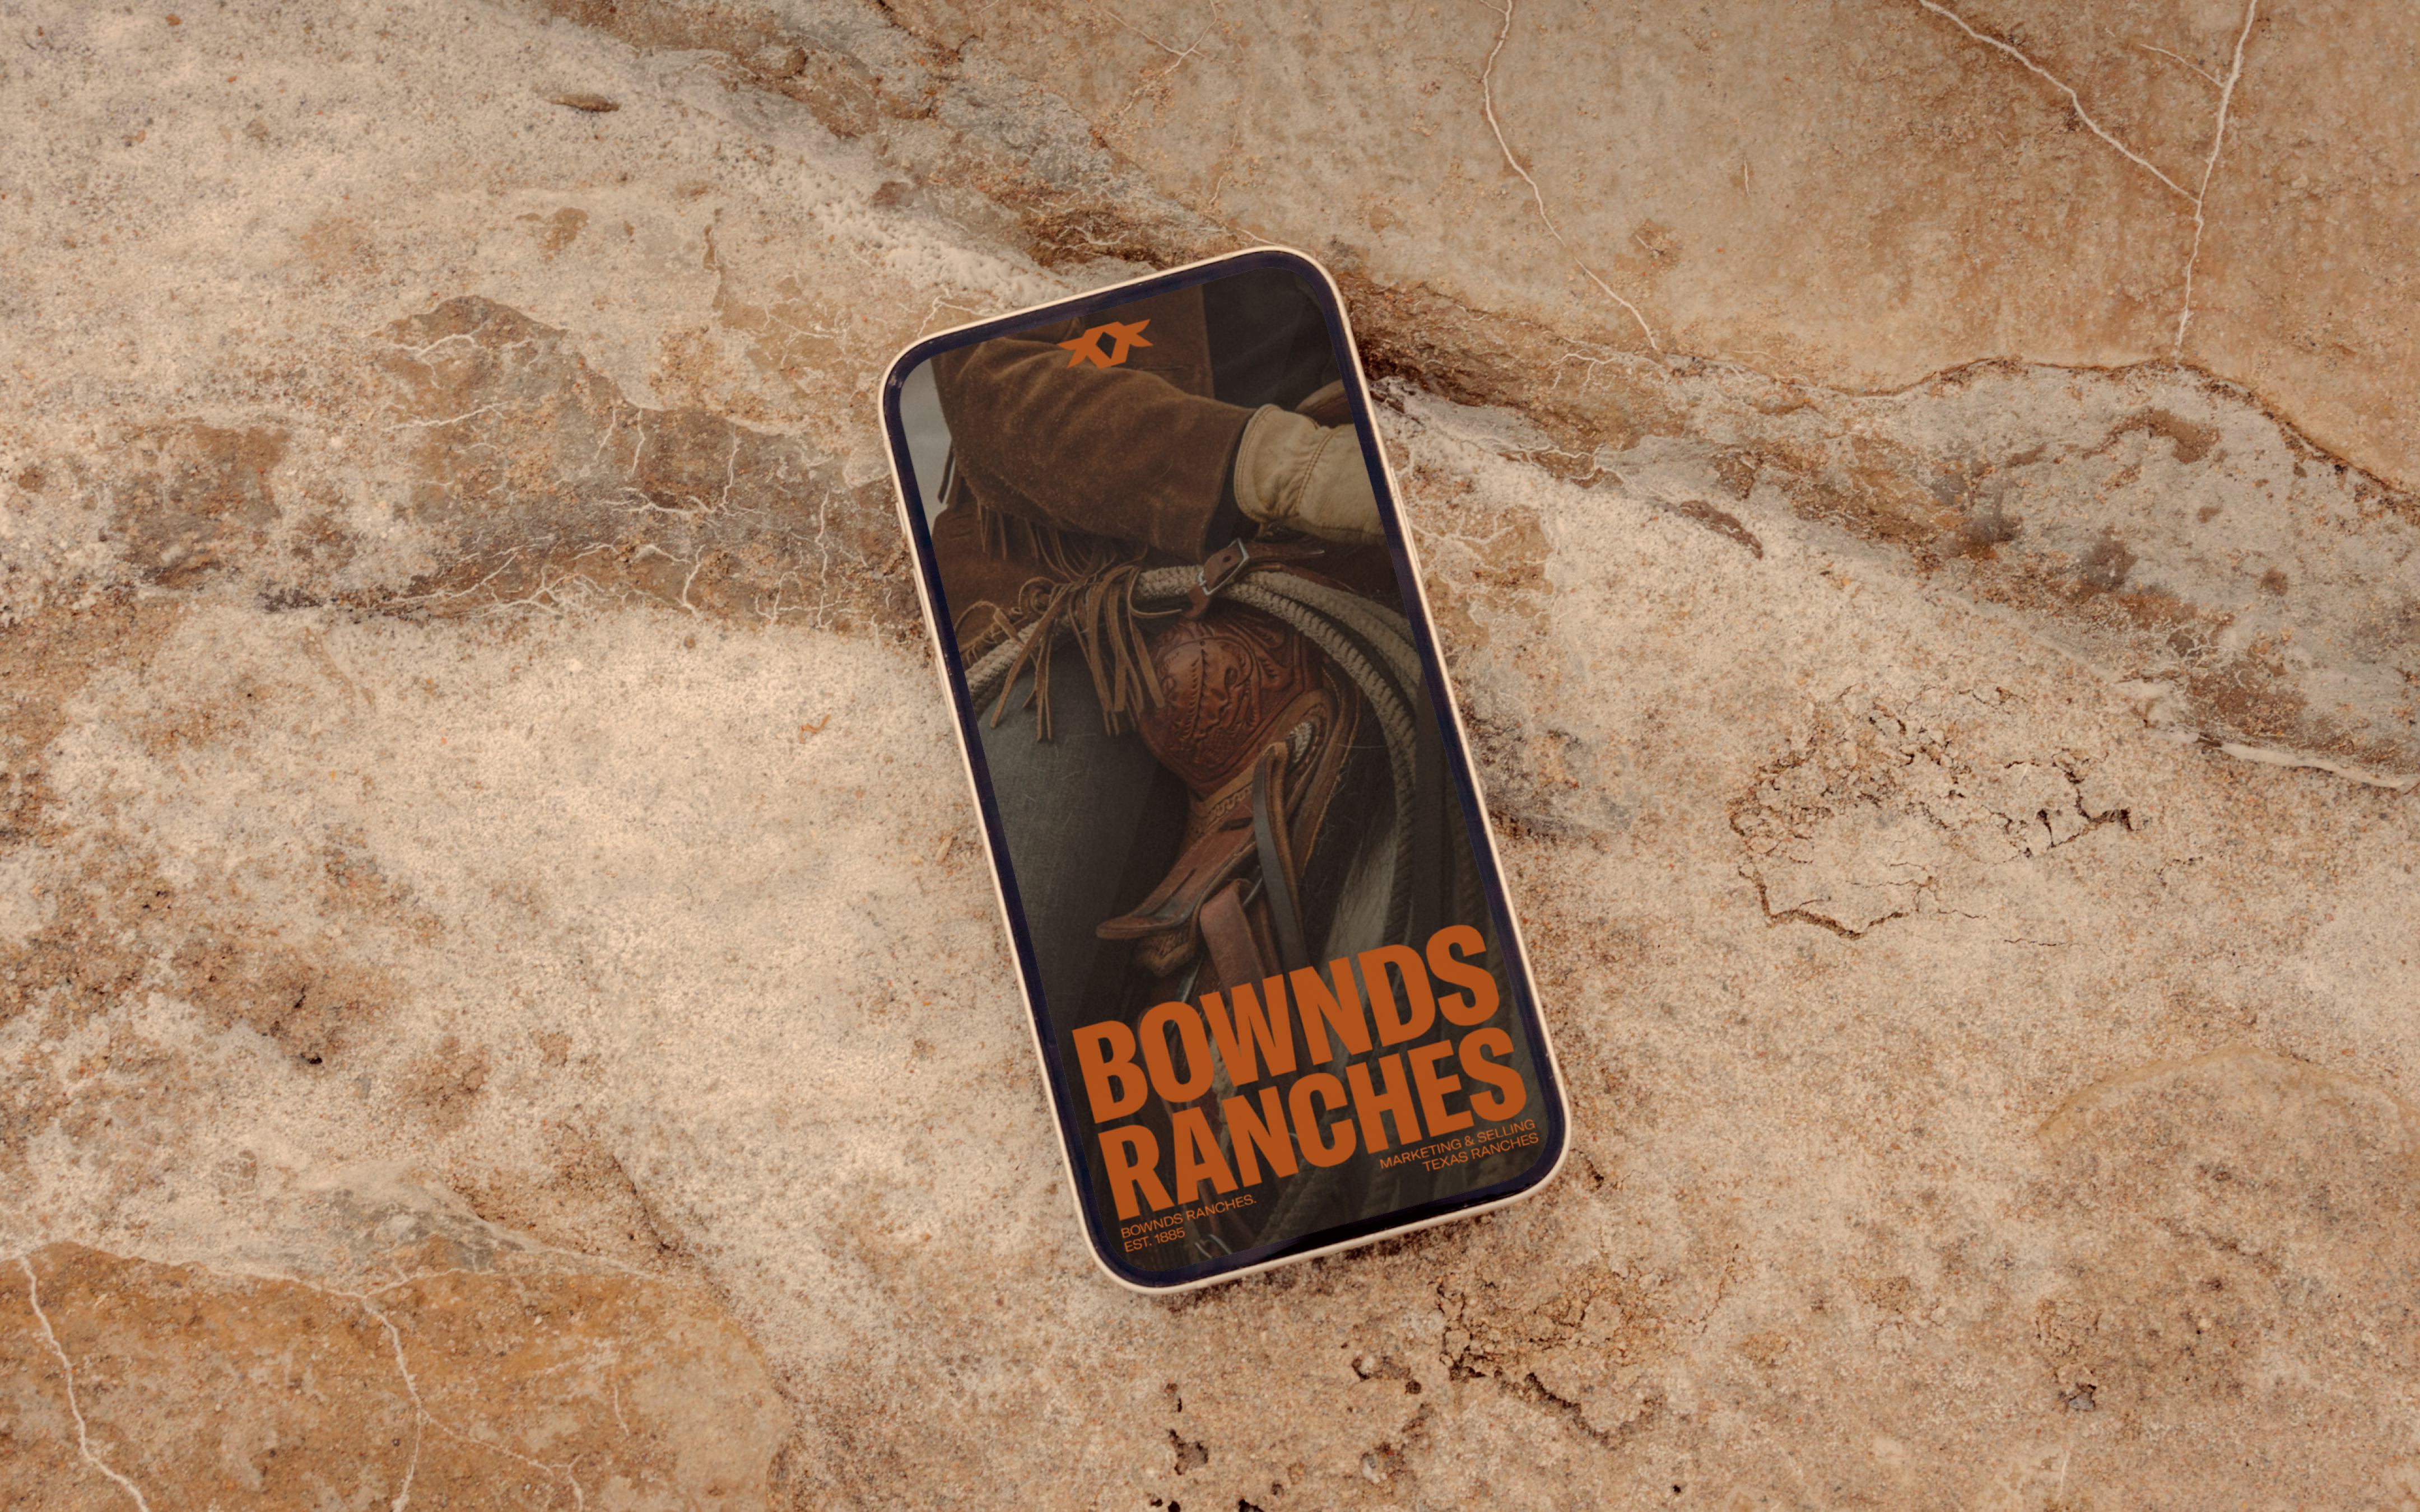 Bownds Ranches mobile